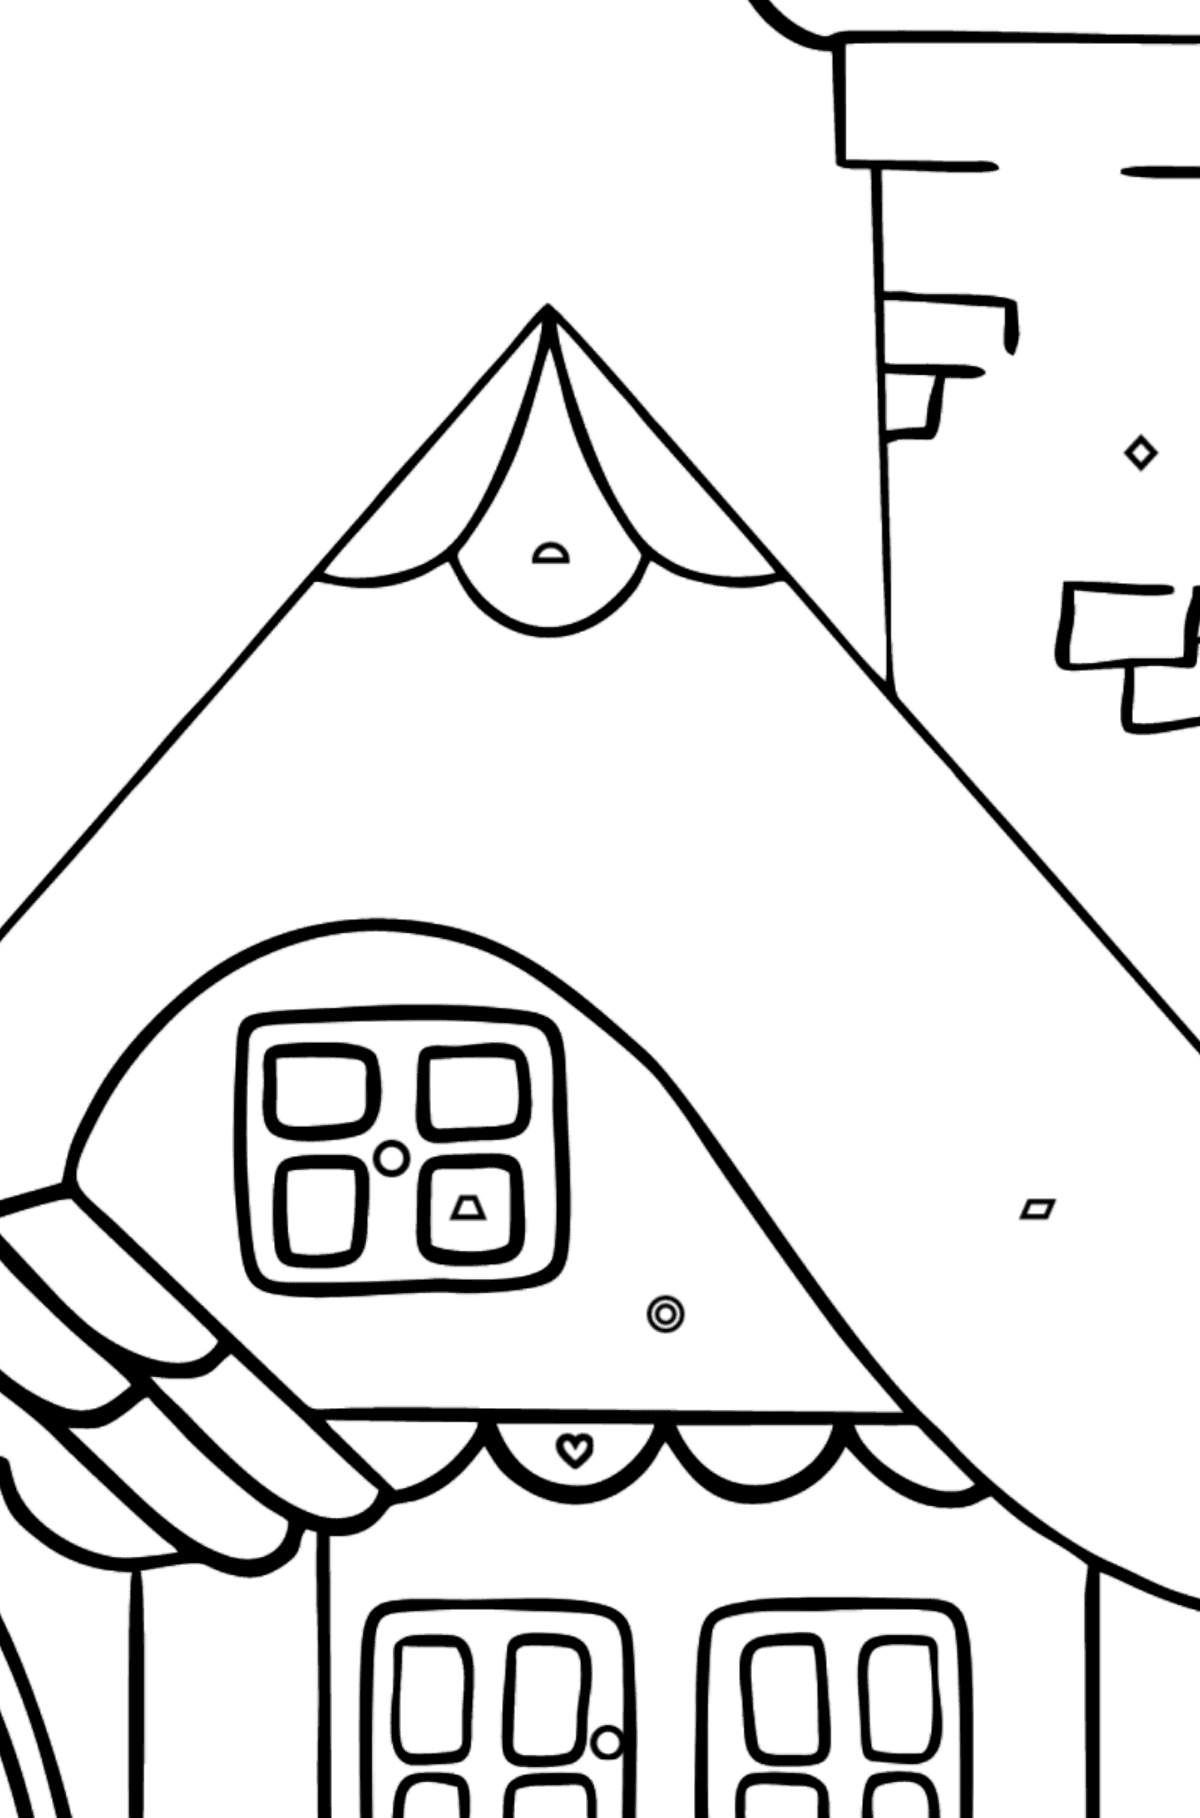 Coloring Page - A Wonderful House - Coloring by Geometric Shapes for Kids